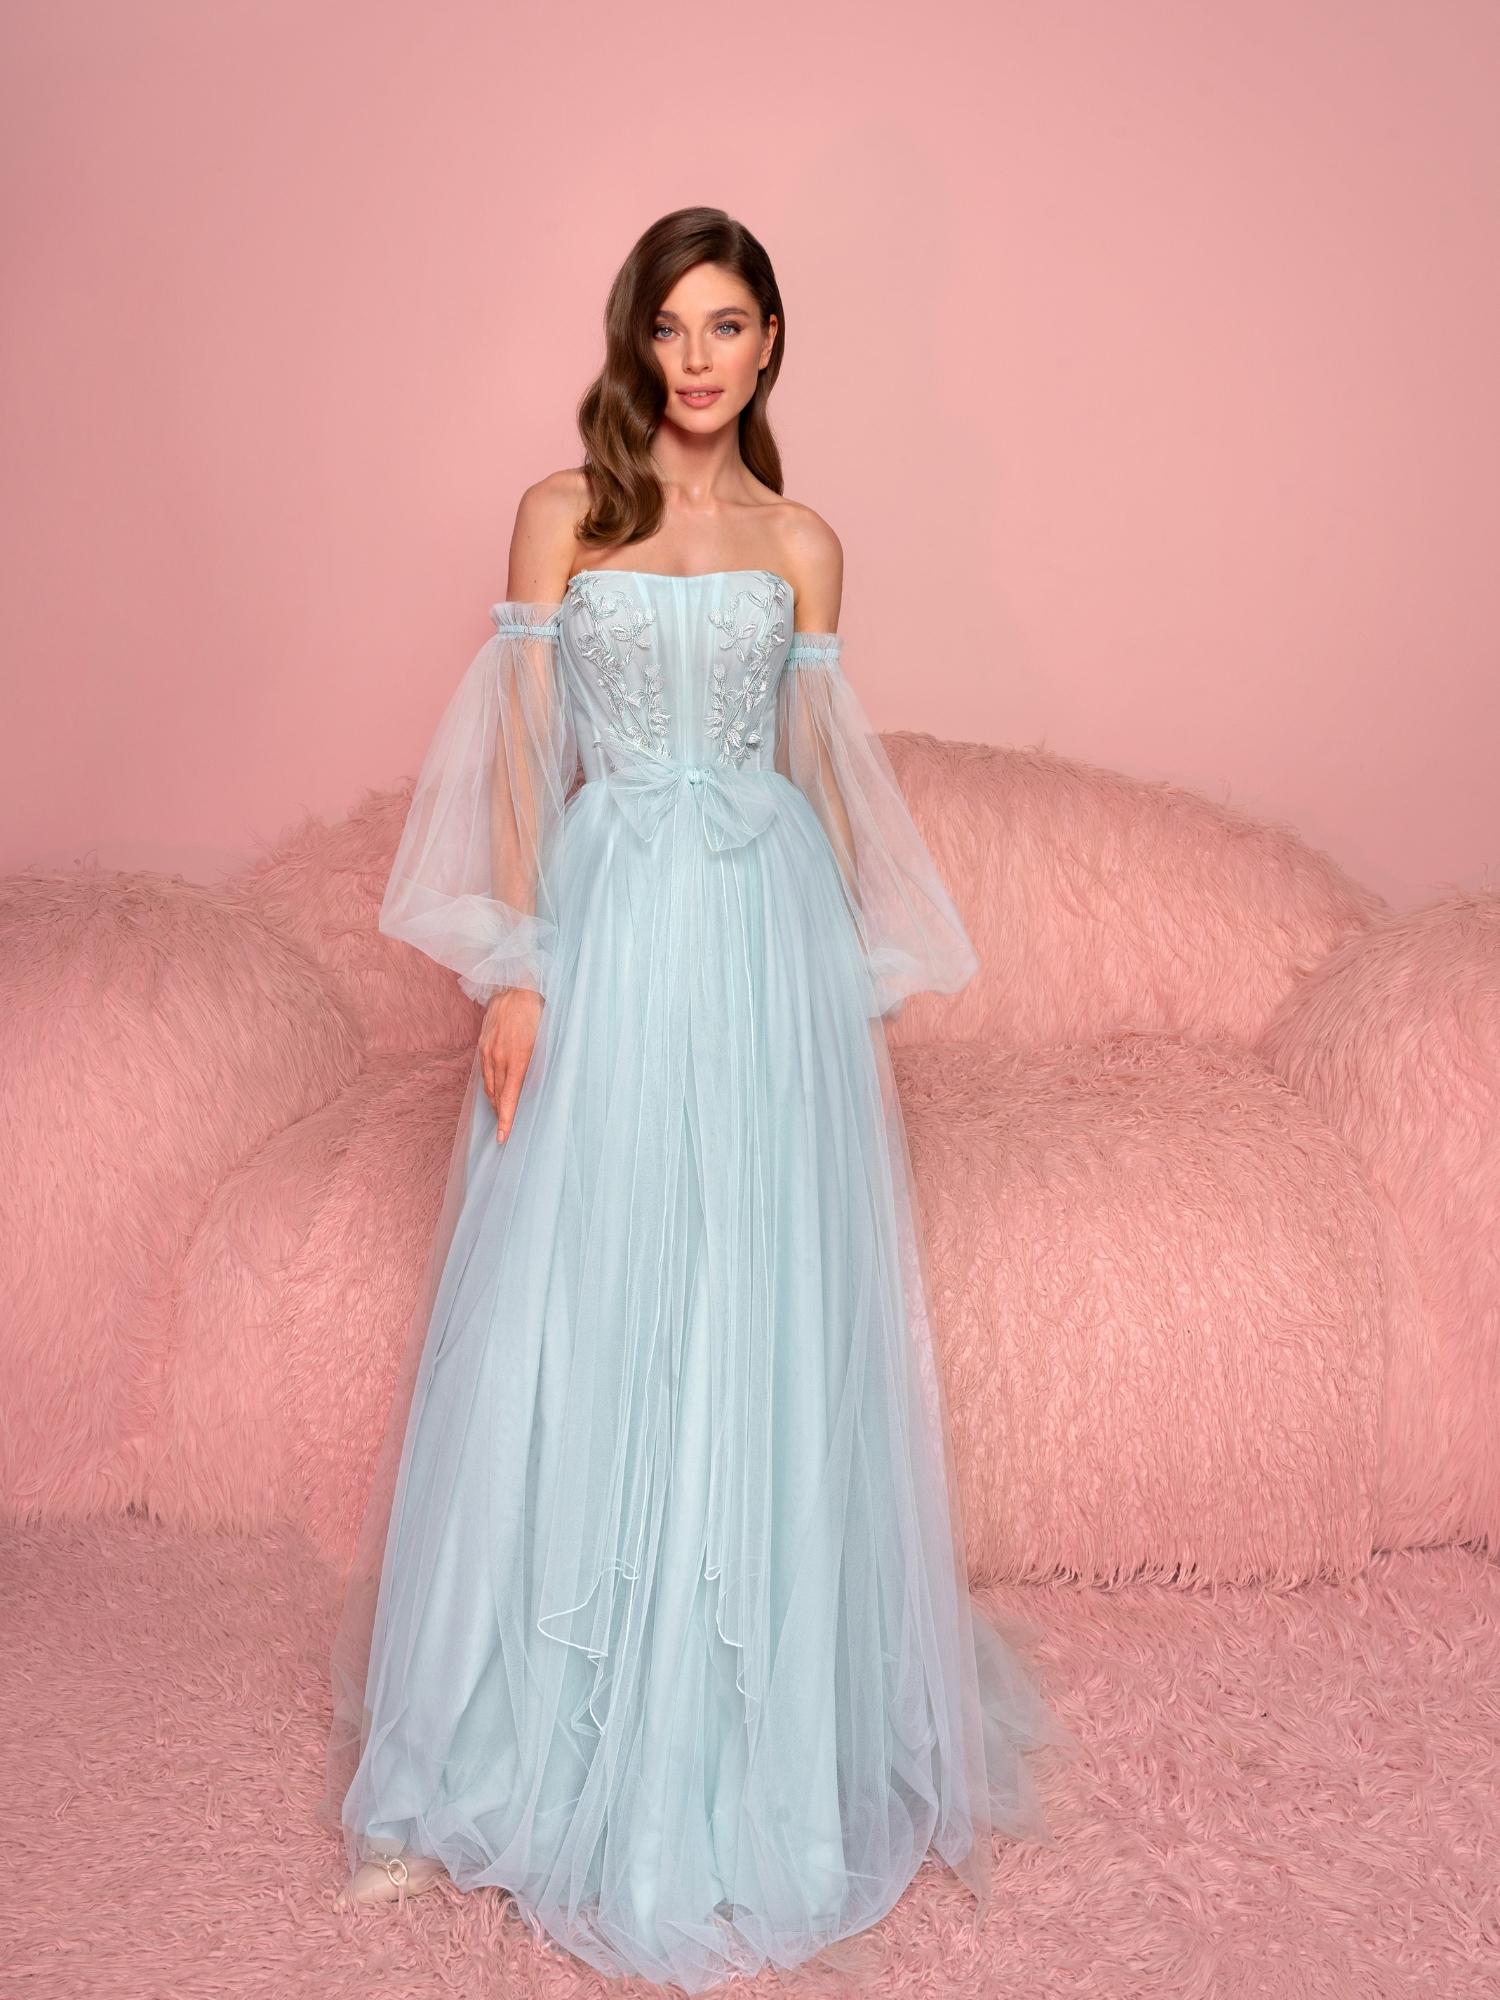 Tulle A-line dress with detachable long sleeves